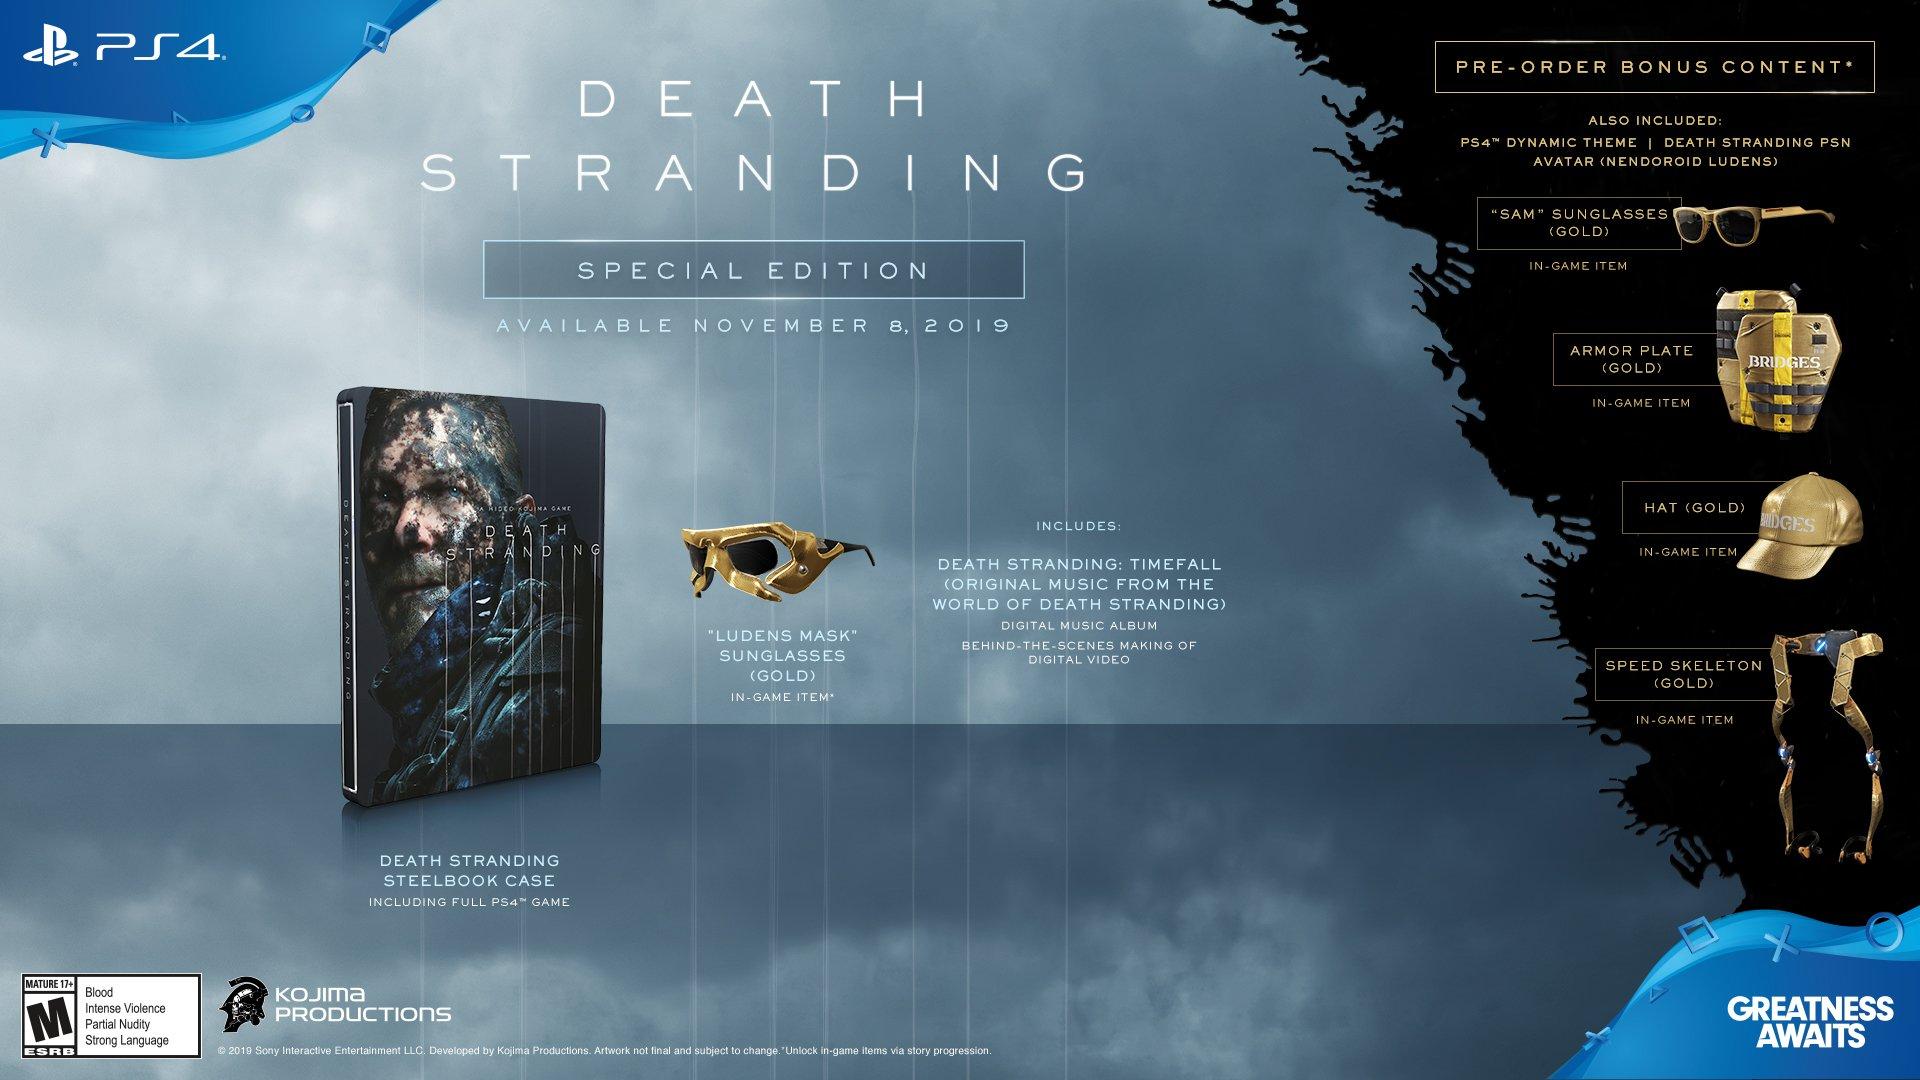 death stranding used ps4